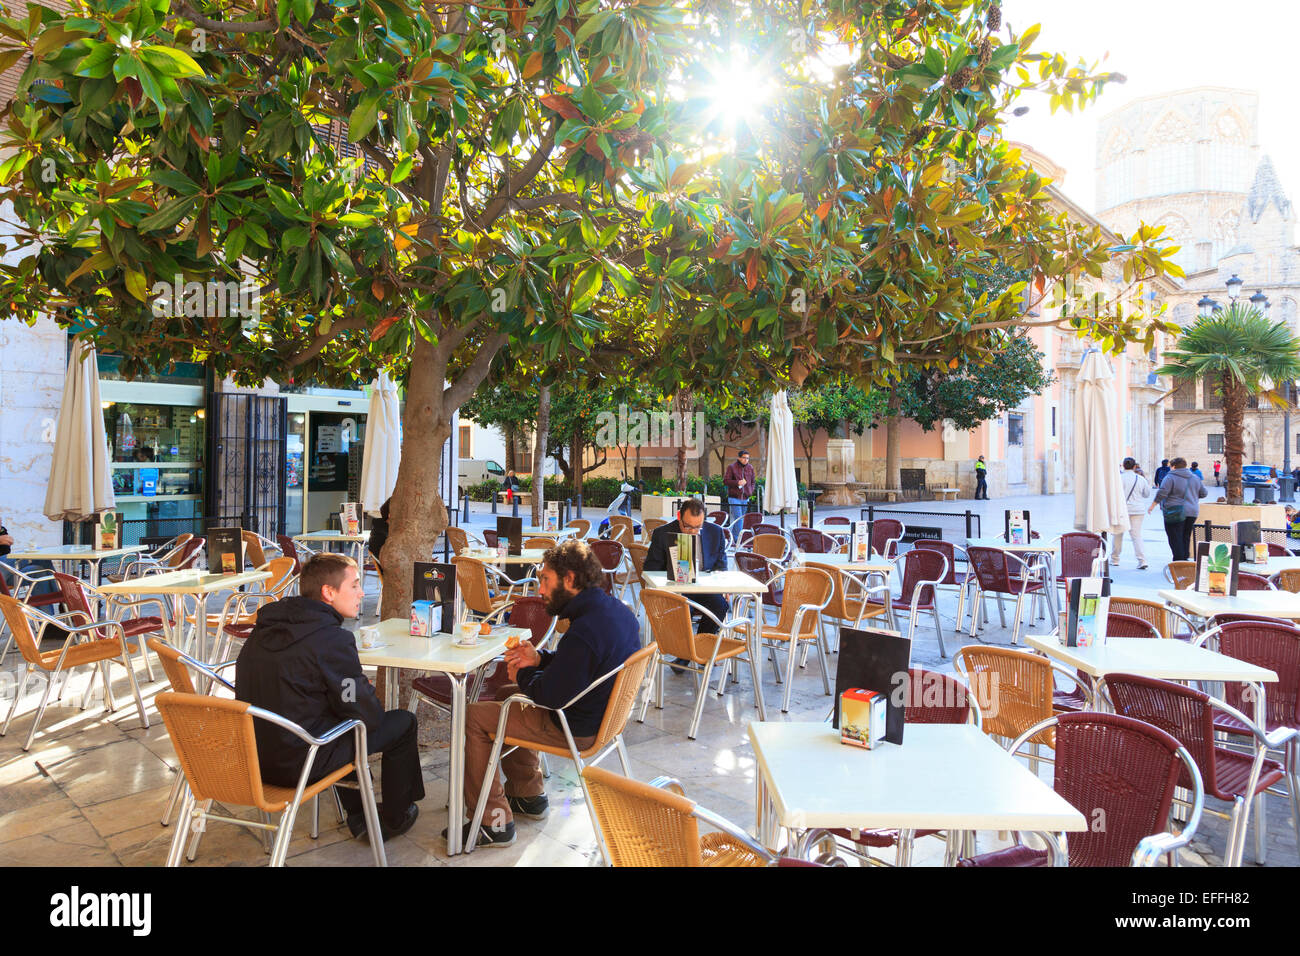 Customers in a street cafe in the Plaza de la Seu with sun glimpsing through trees Stock Photo